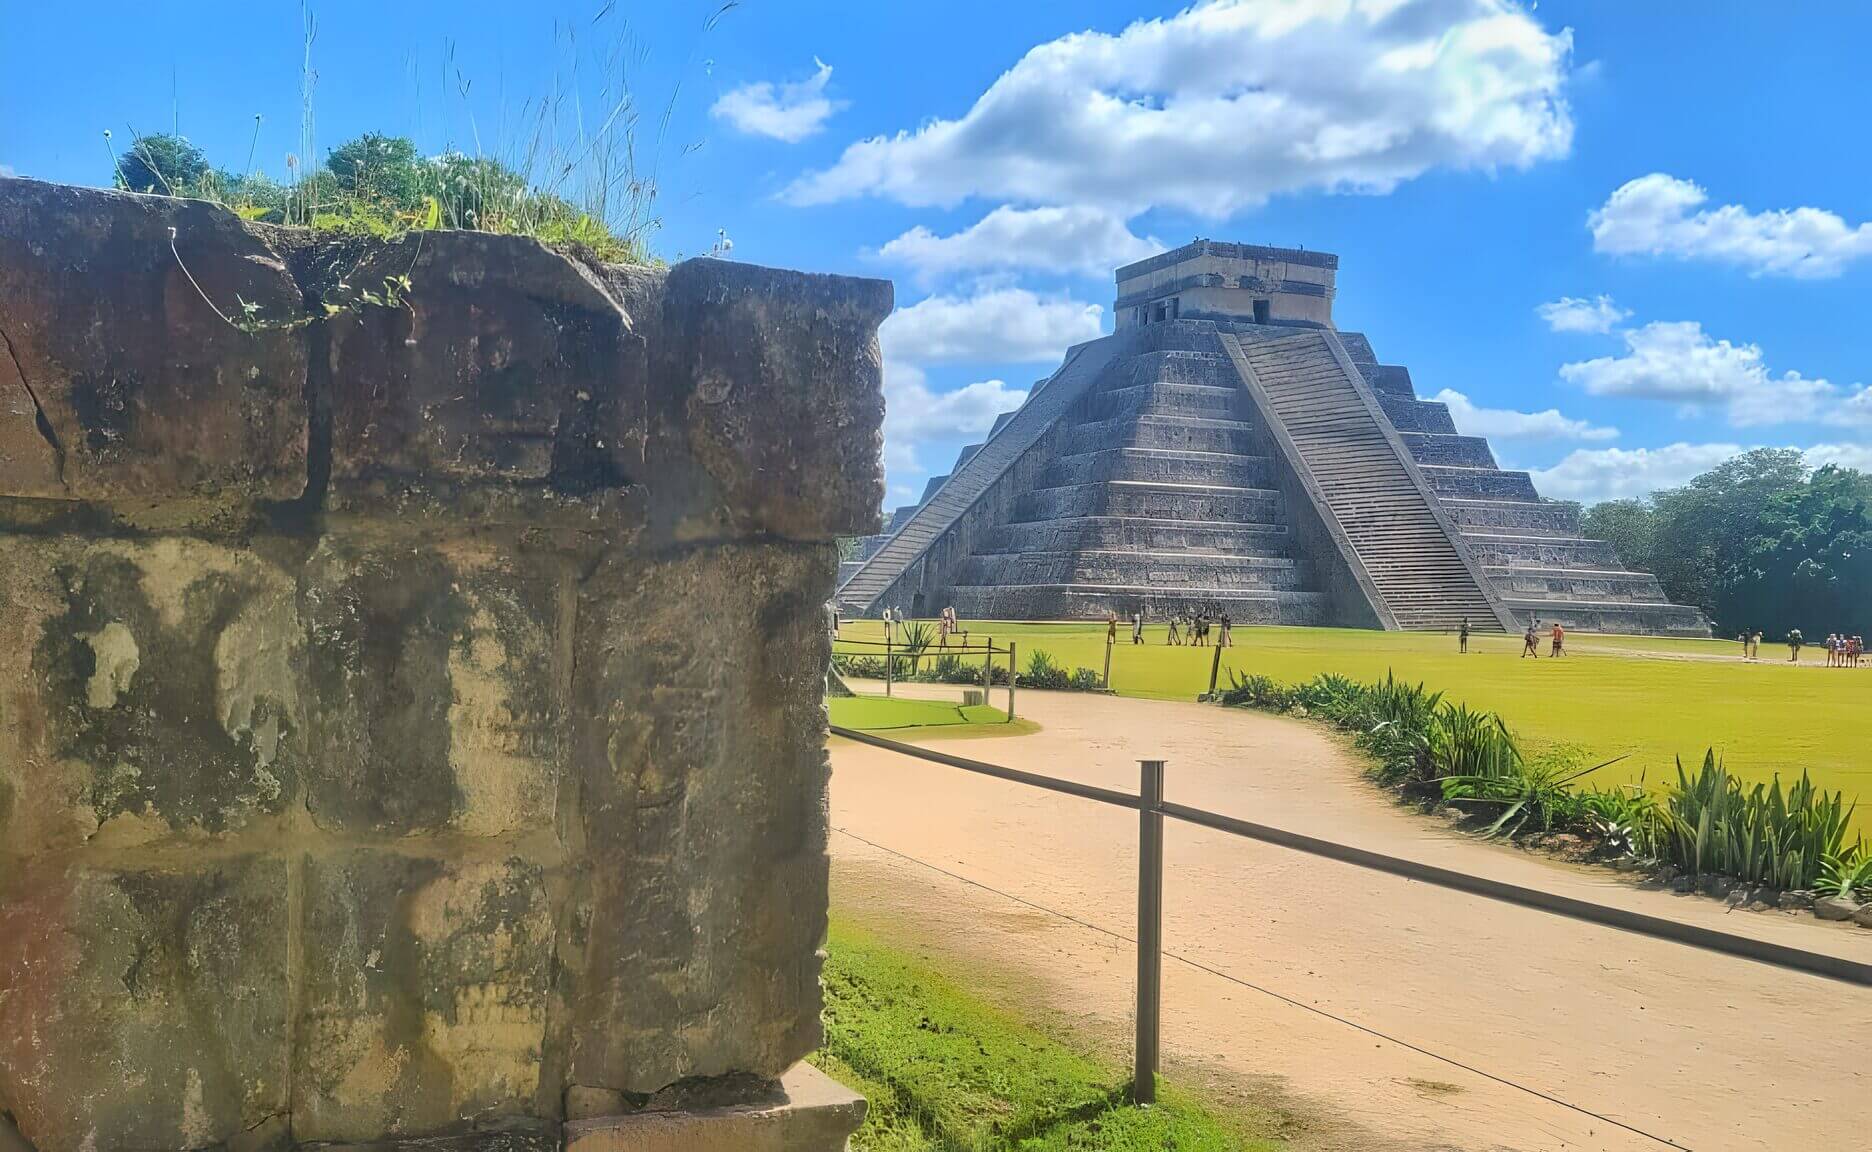 Visitors exploring the grounds near the El Castillo pyramid at Chichen Itza on a sunny day with blue skies.